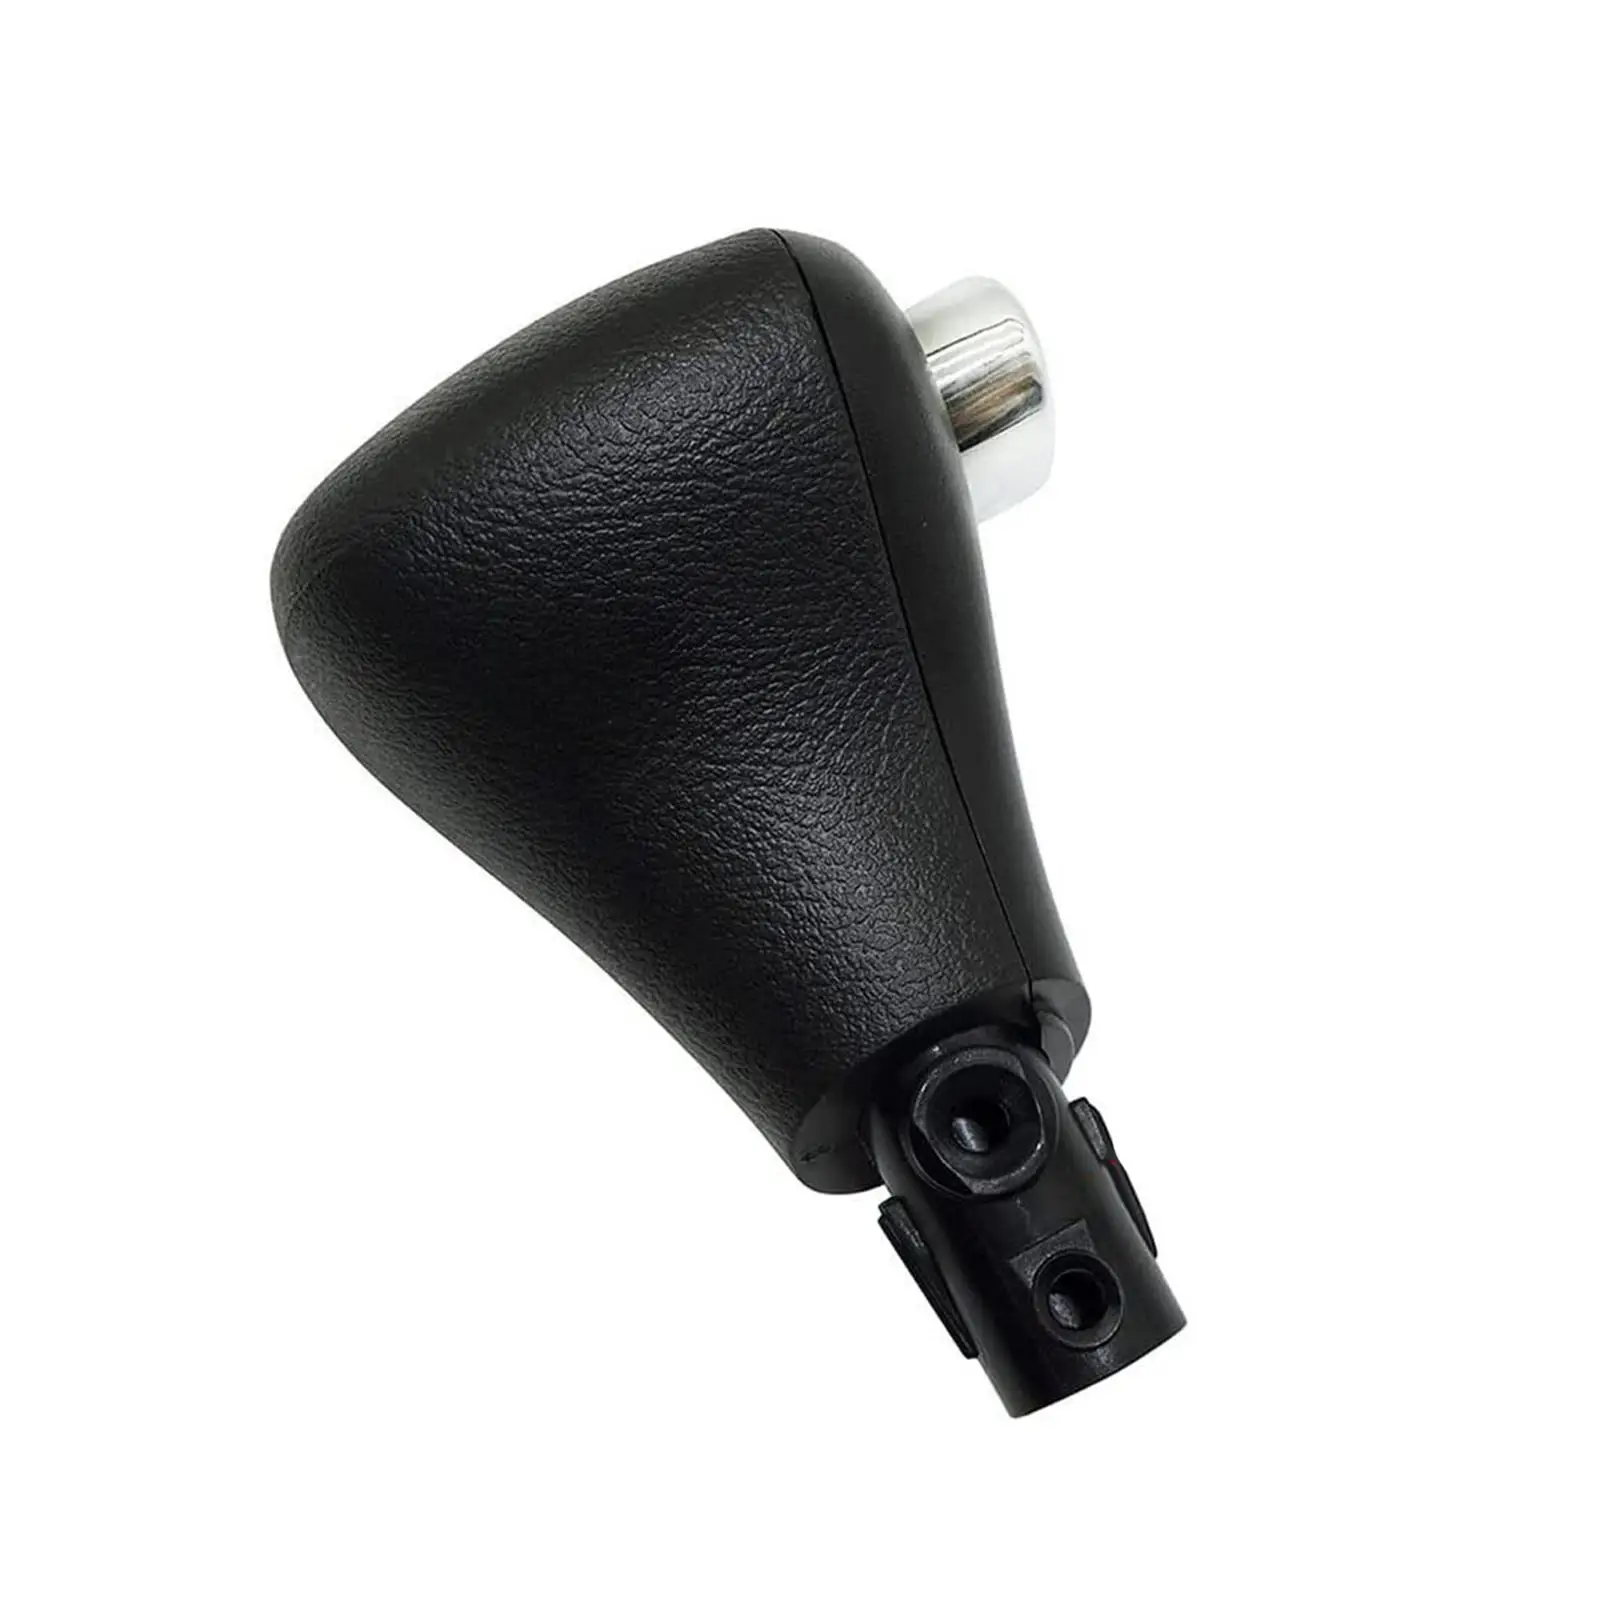 Gear Shift Knob 54131-sda-a51 Gear Shift Lever Knob Replace for Honda Accord 4 Door Only 03-05 Accessories Easily Install